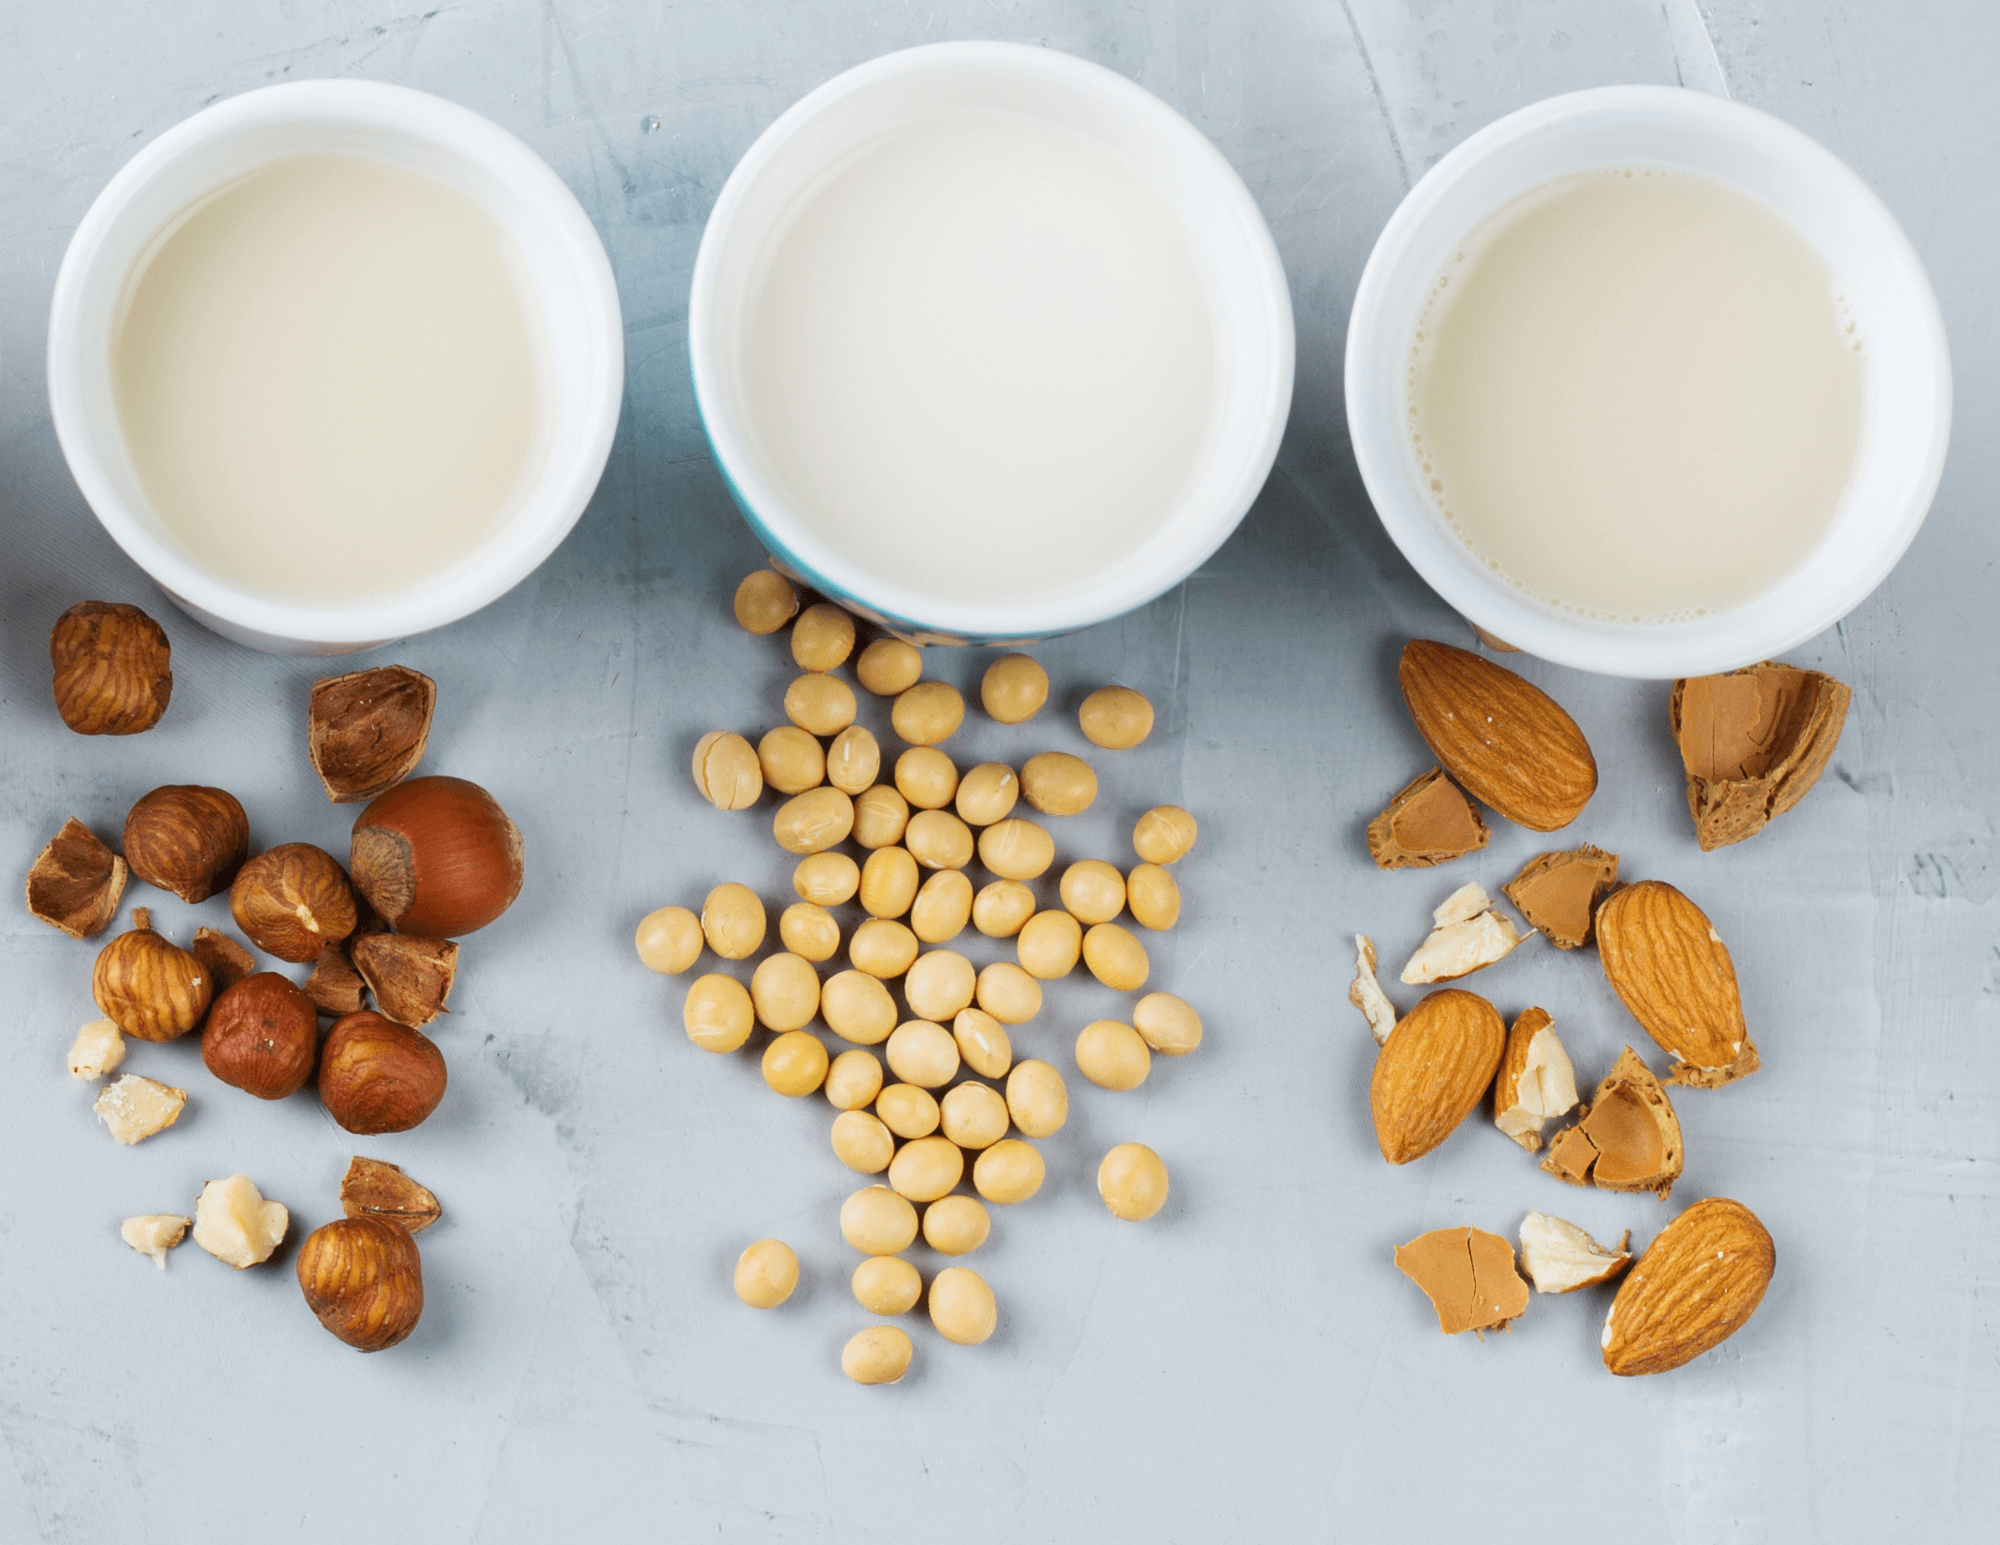 allergens tested in an oral food challenge, nut allergy, soy allergy